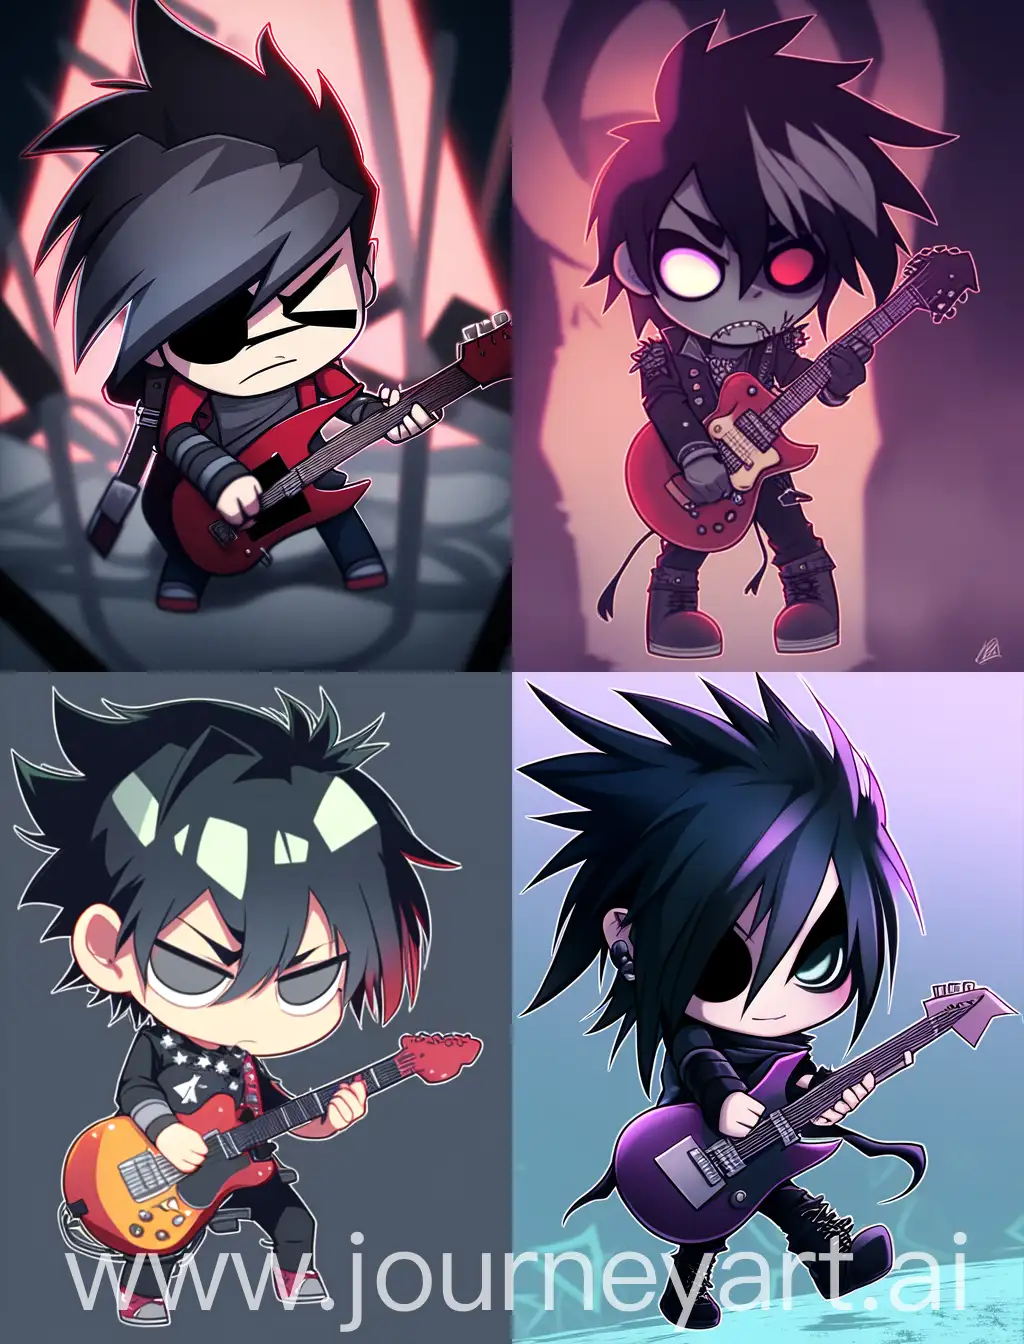 Chibi-Emo-Guy-Playing-Guitar-Cartoon-Anime-Style-with-Strong-Lines-and-Spooky-Background